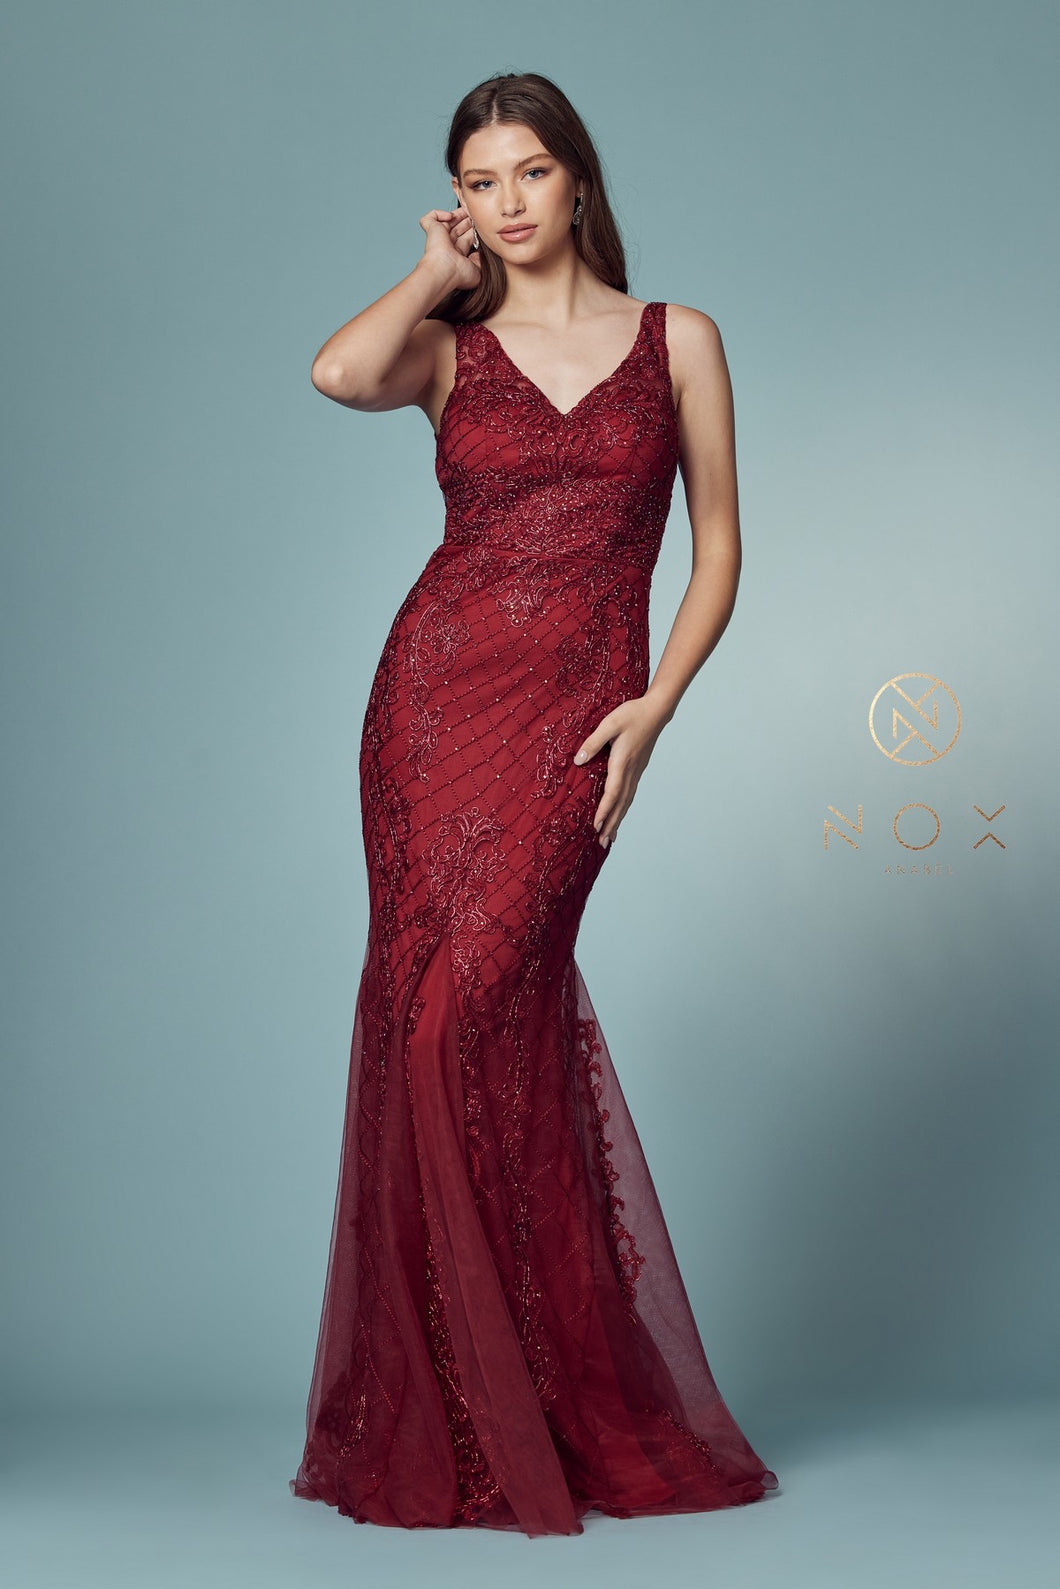 N A398 - Bead Lace Appliqued Fit & Flare Prom Gown with V-Neck & Open Back PROM GOWN Nox 4 BURGUNDY 